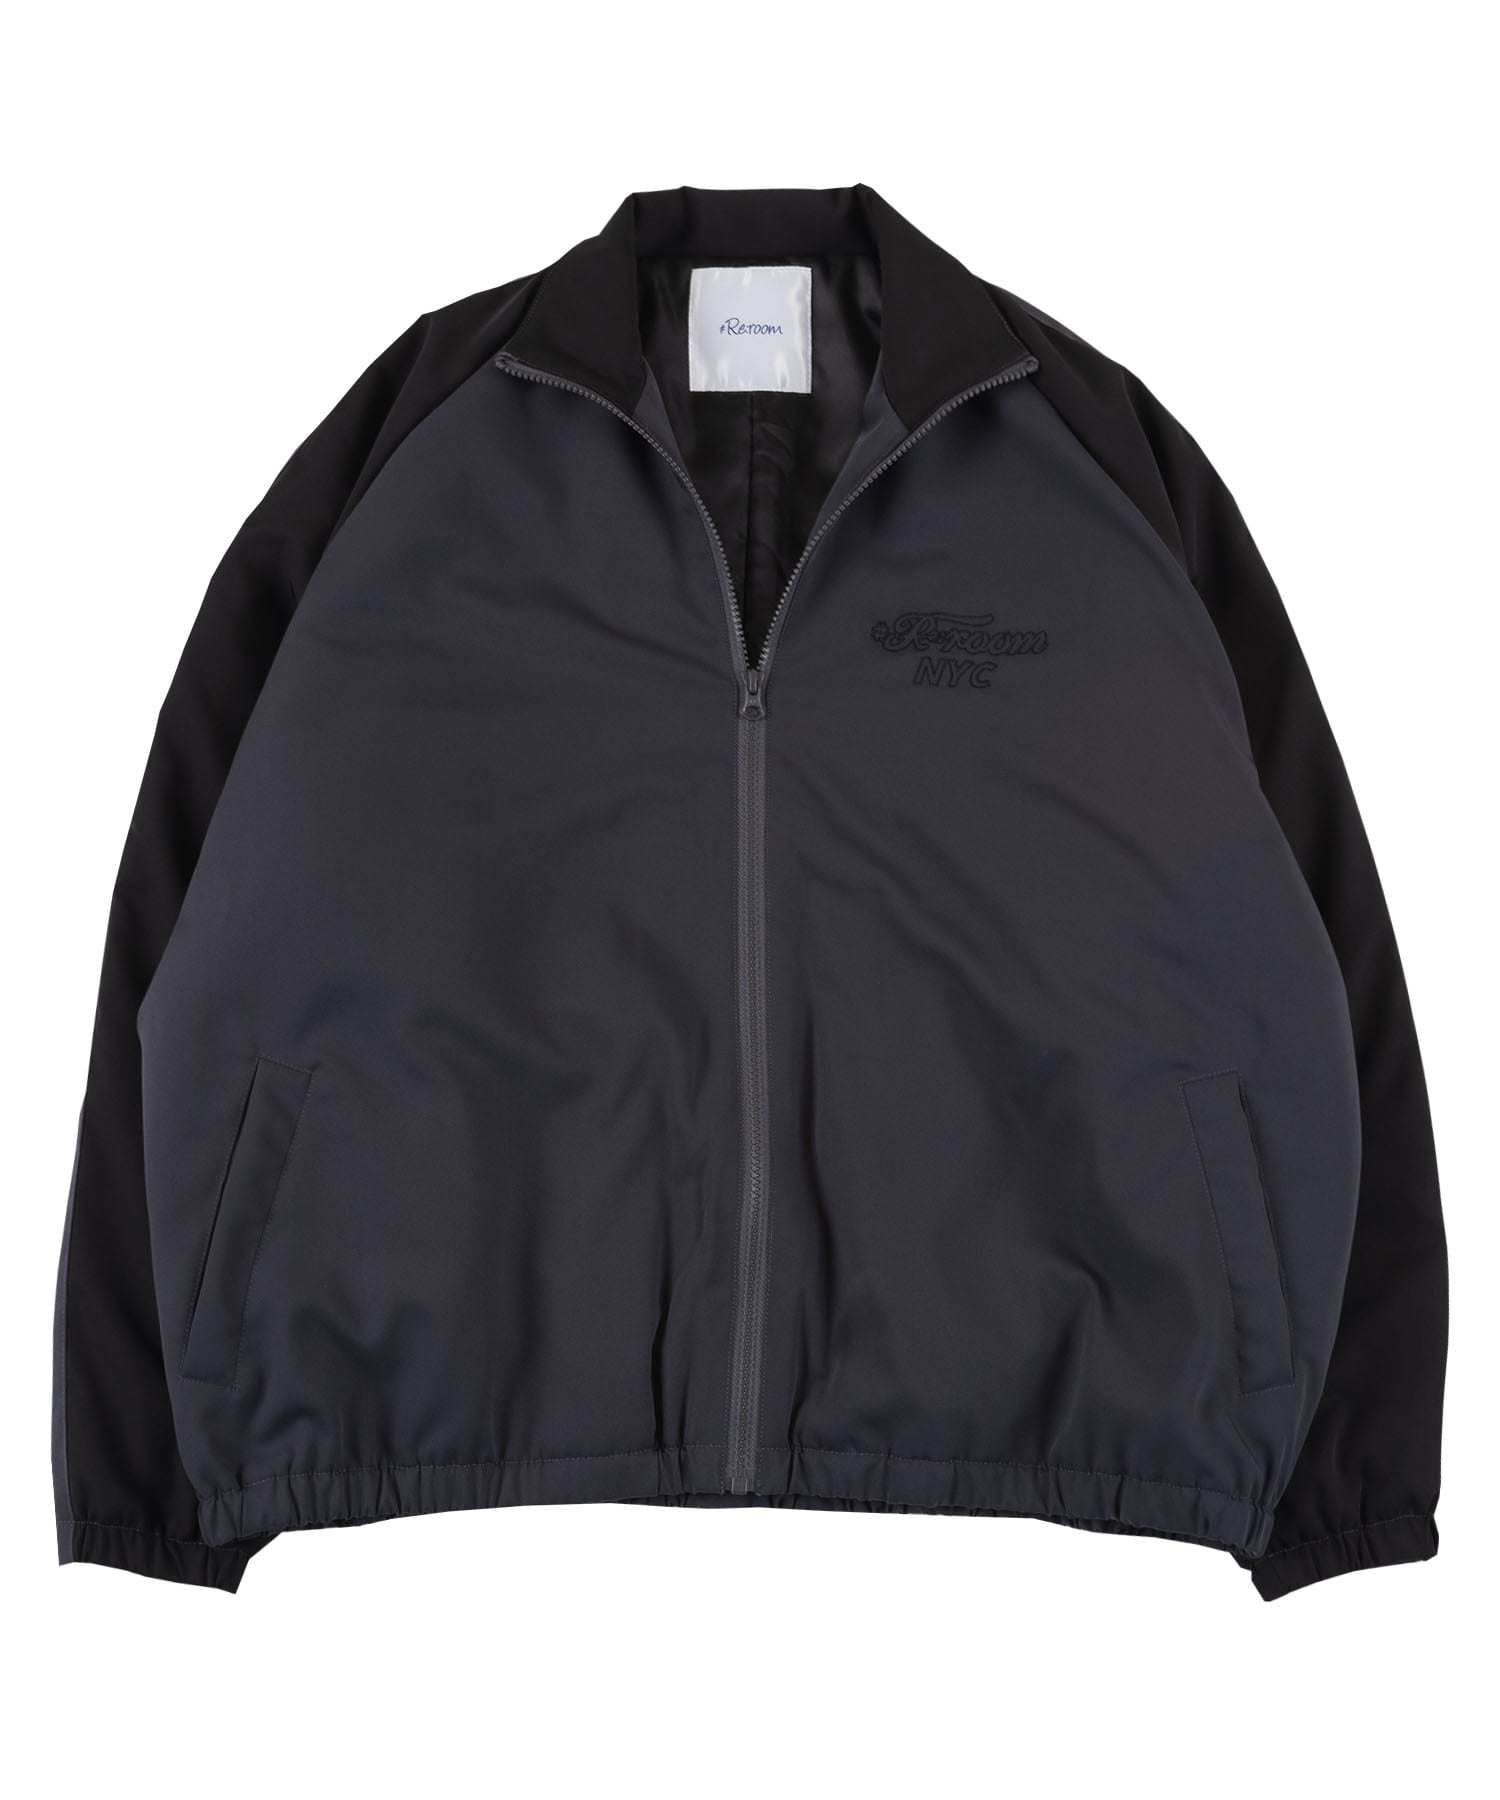 【#Re:room】LITE PUFF COLOR TRACK JACKET［REJ099］ | #Re:room（リルーム）